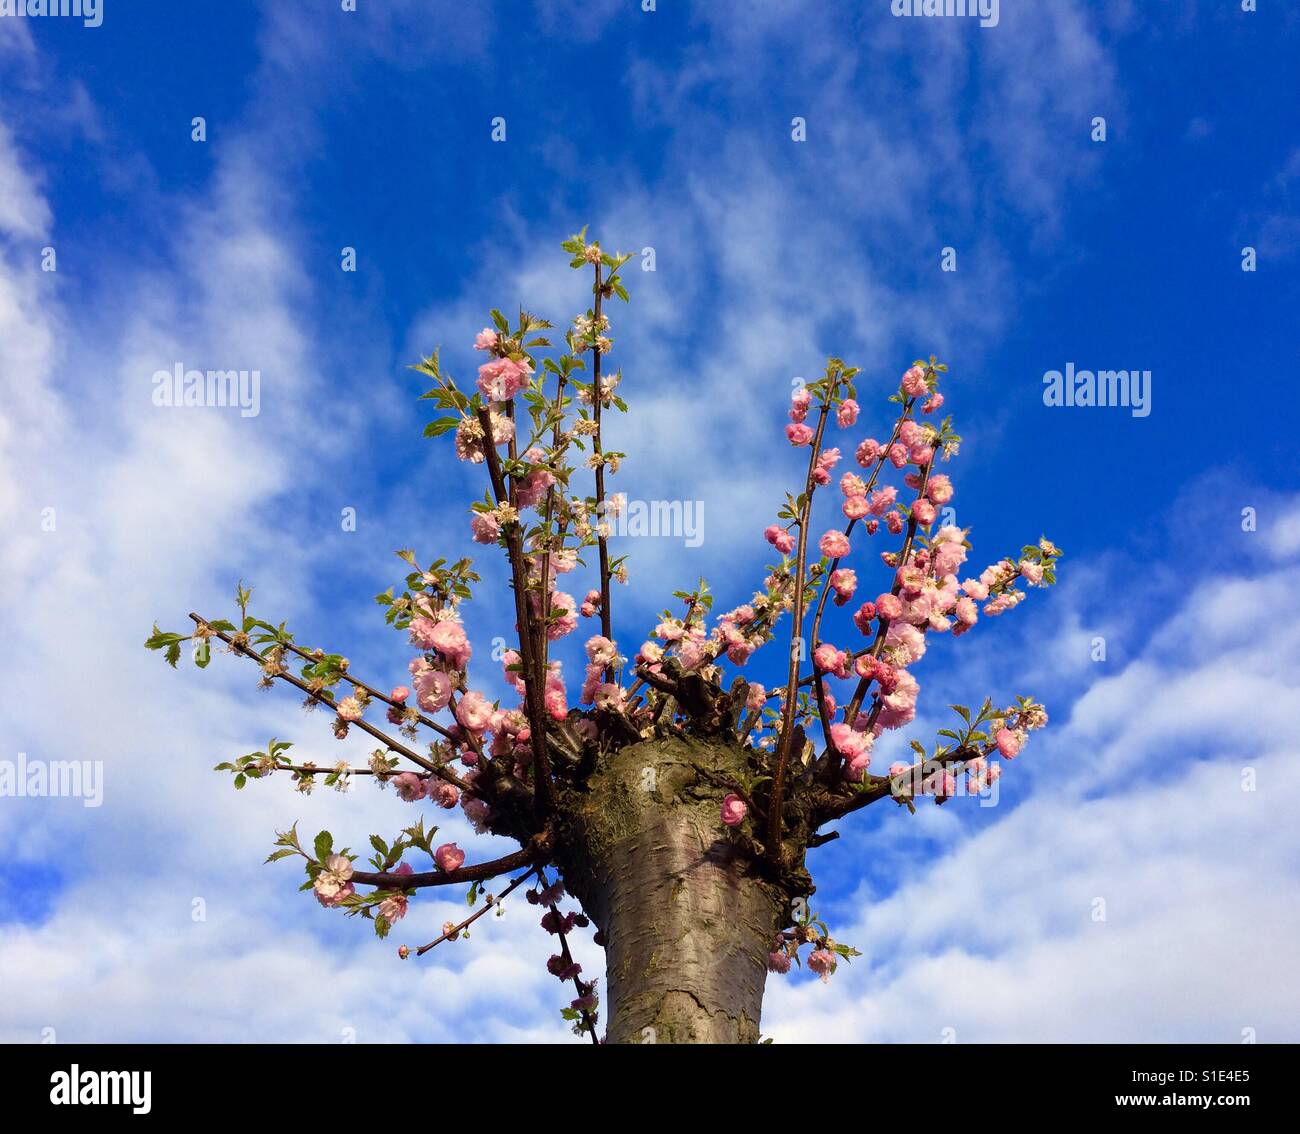 Wild cherry tree in full blossom against blue sky and white clouds Stock Photo